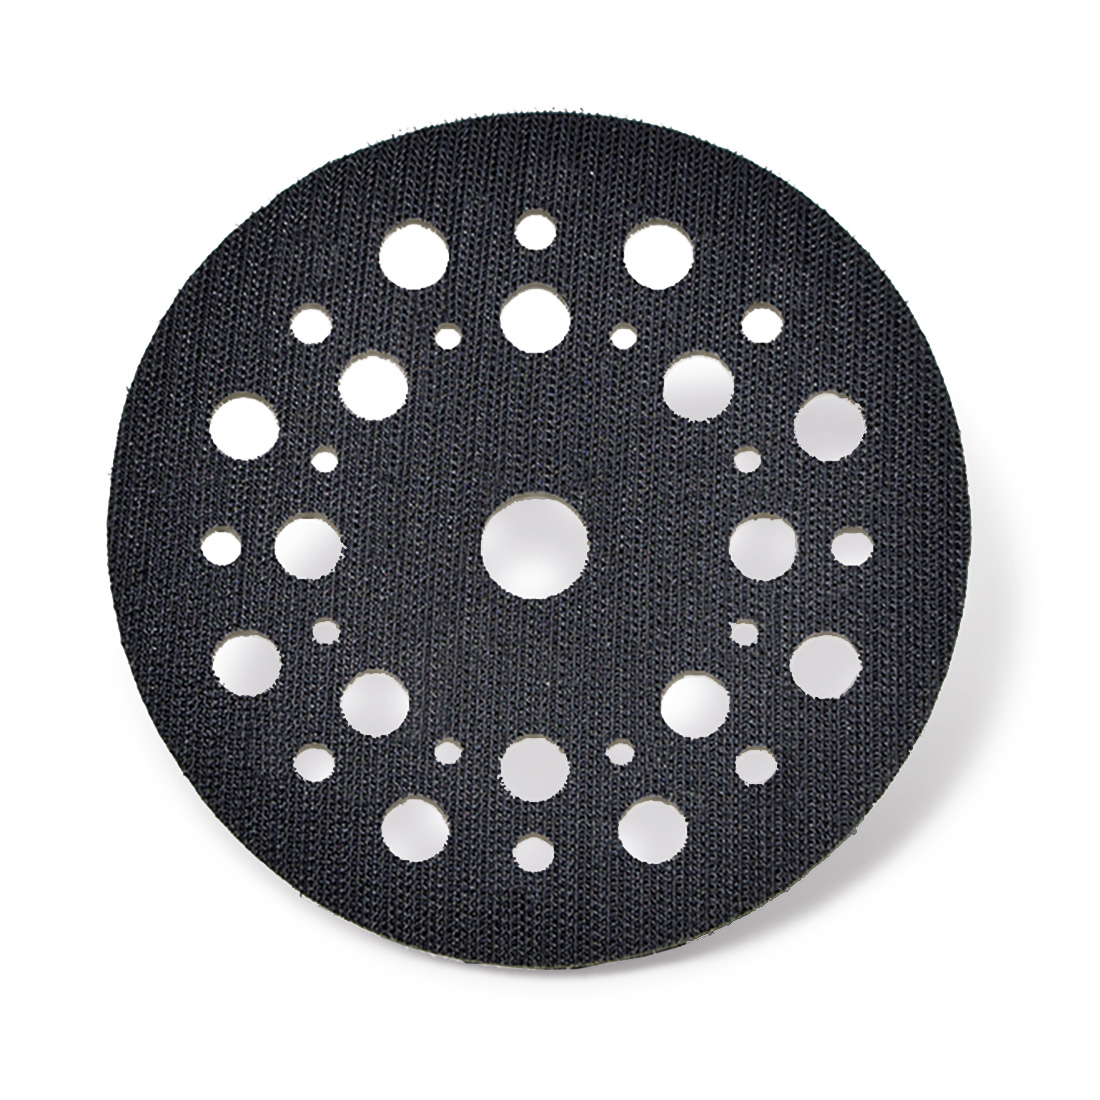 Driving disc protection 125 mm